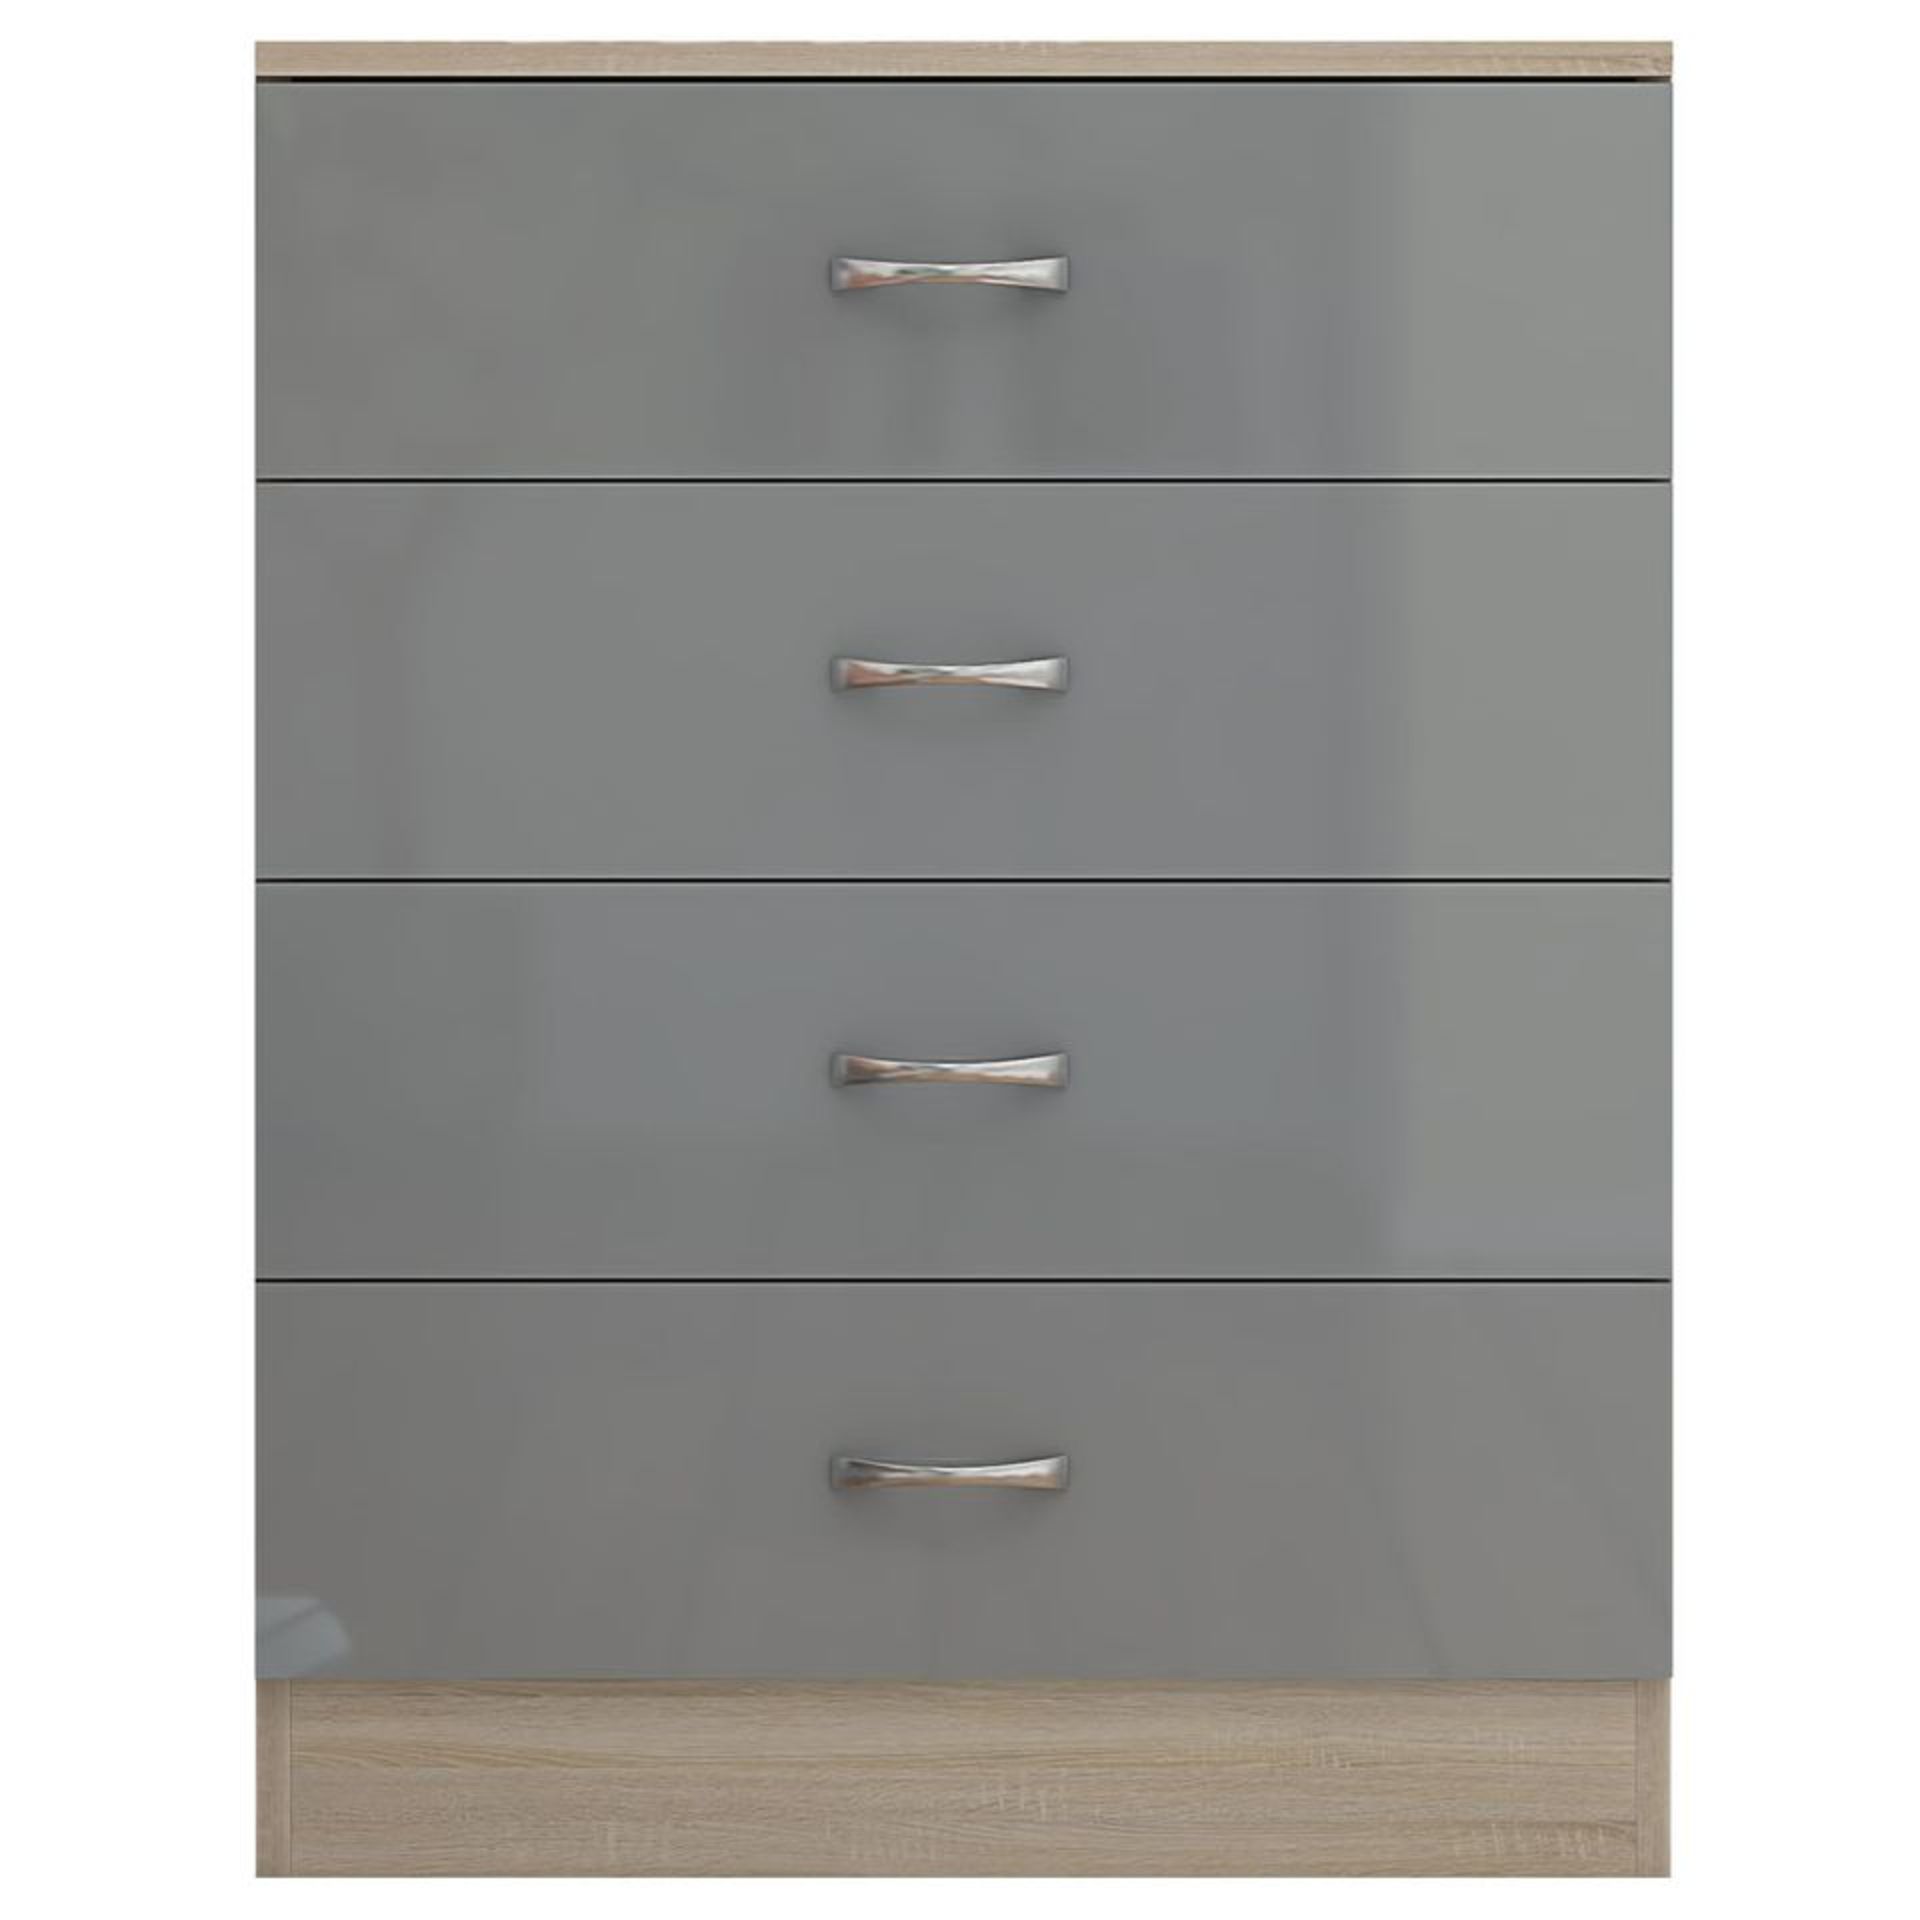 SET OF CHEST AND BEDSIDE - GREY GLOSS ON SONOMA OAK - 4 Drawer Chest - The 4 drawer chest is an - Image 5 of 5